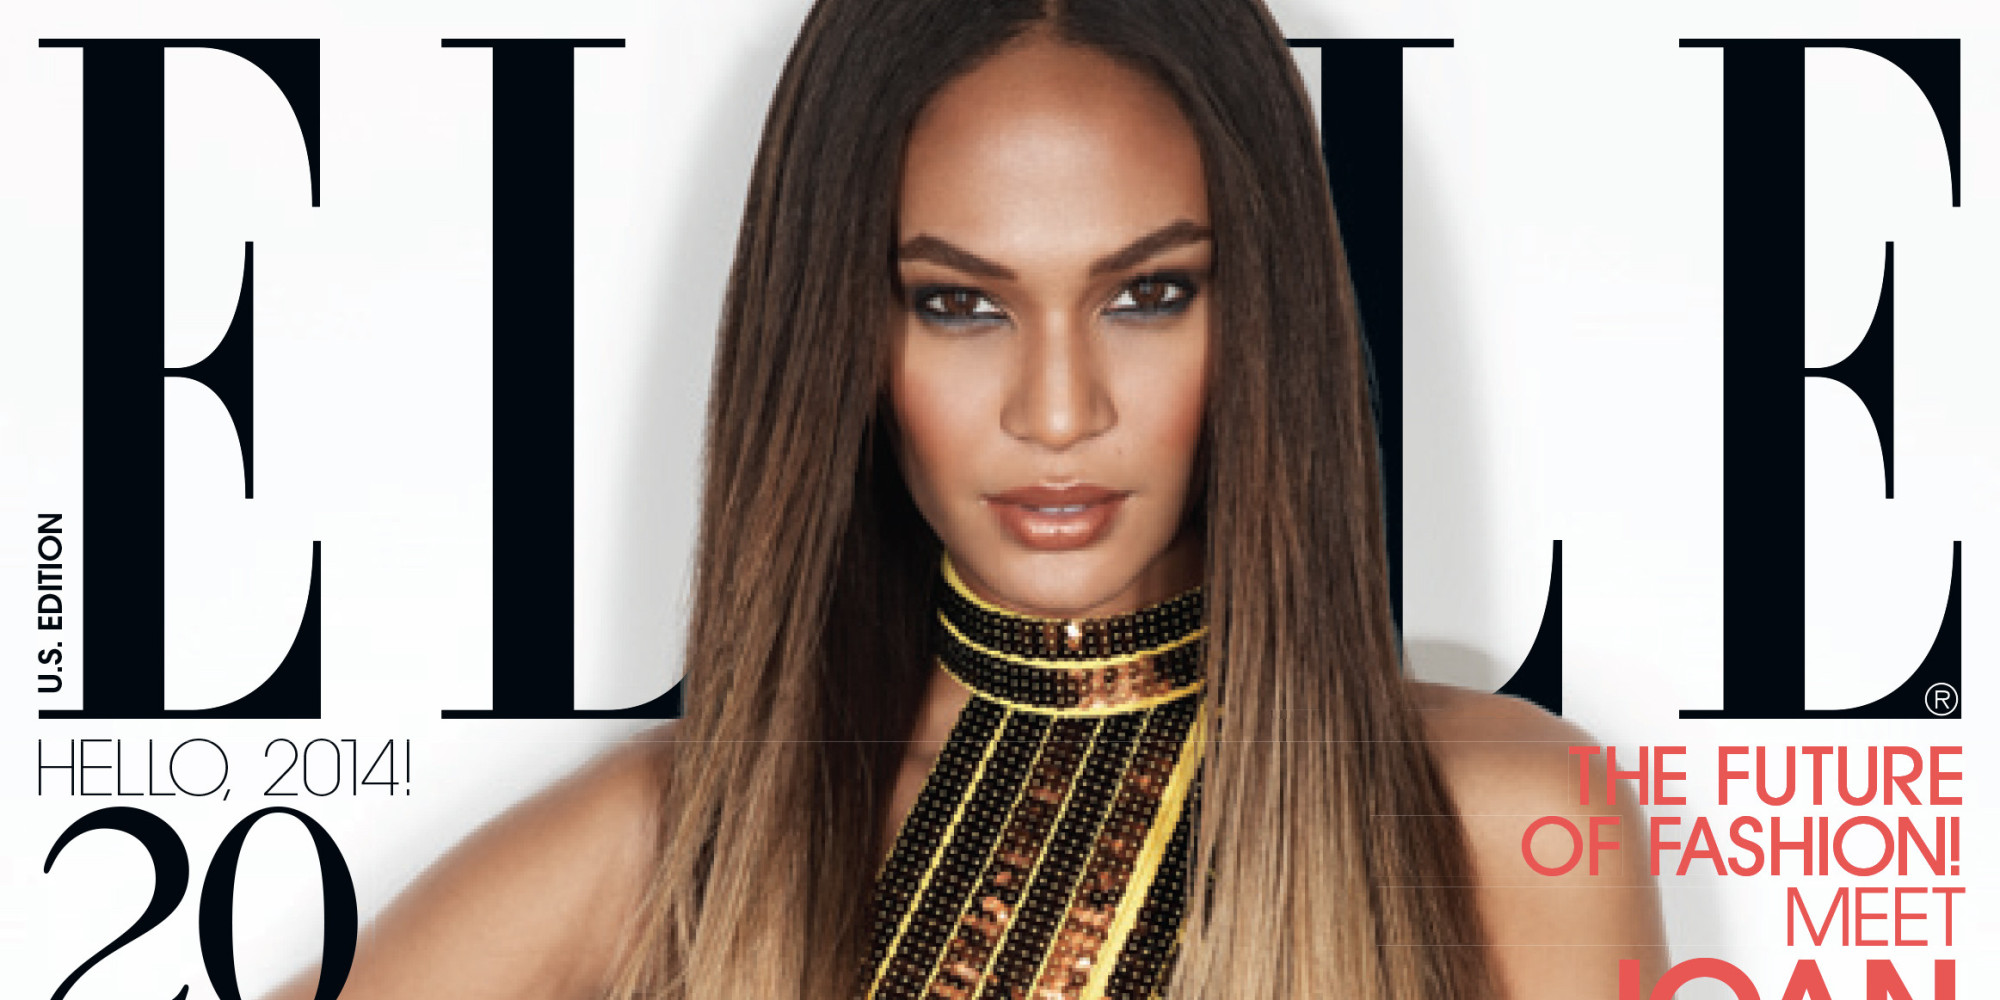 Joan Smalls Gets Glam For Elle S First Cover Of 2014 And Talks Fashion Diversity Photos Huffpost